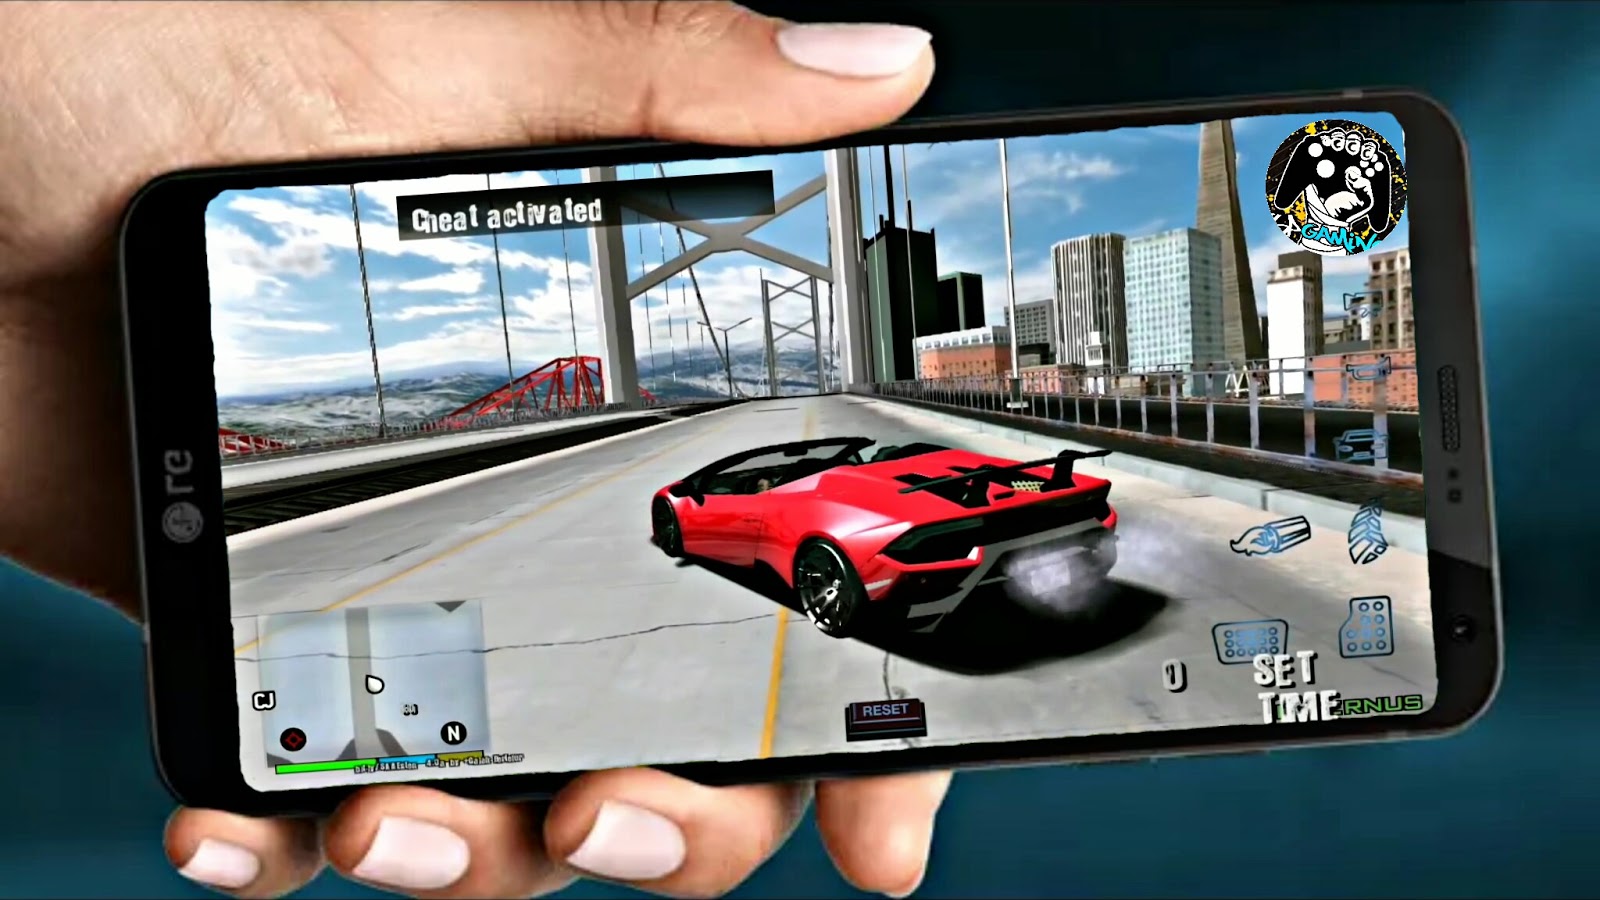 Download Gta 5 Android 300 Mb Best Graphics Mod Pack Gta Sa